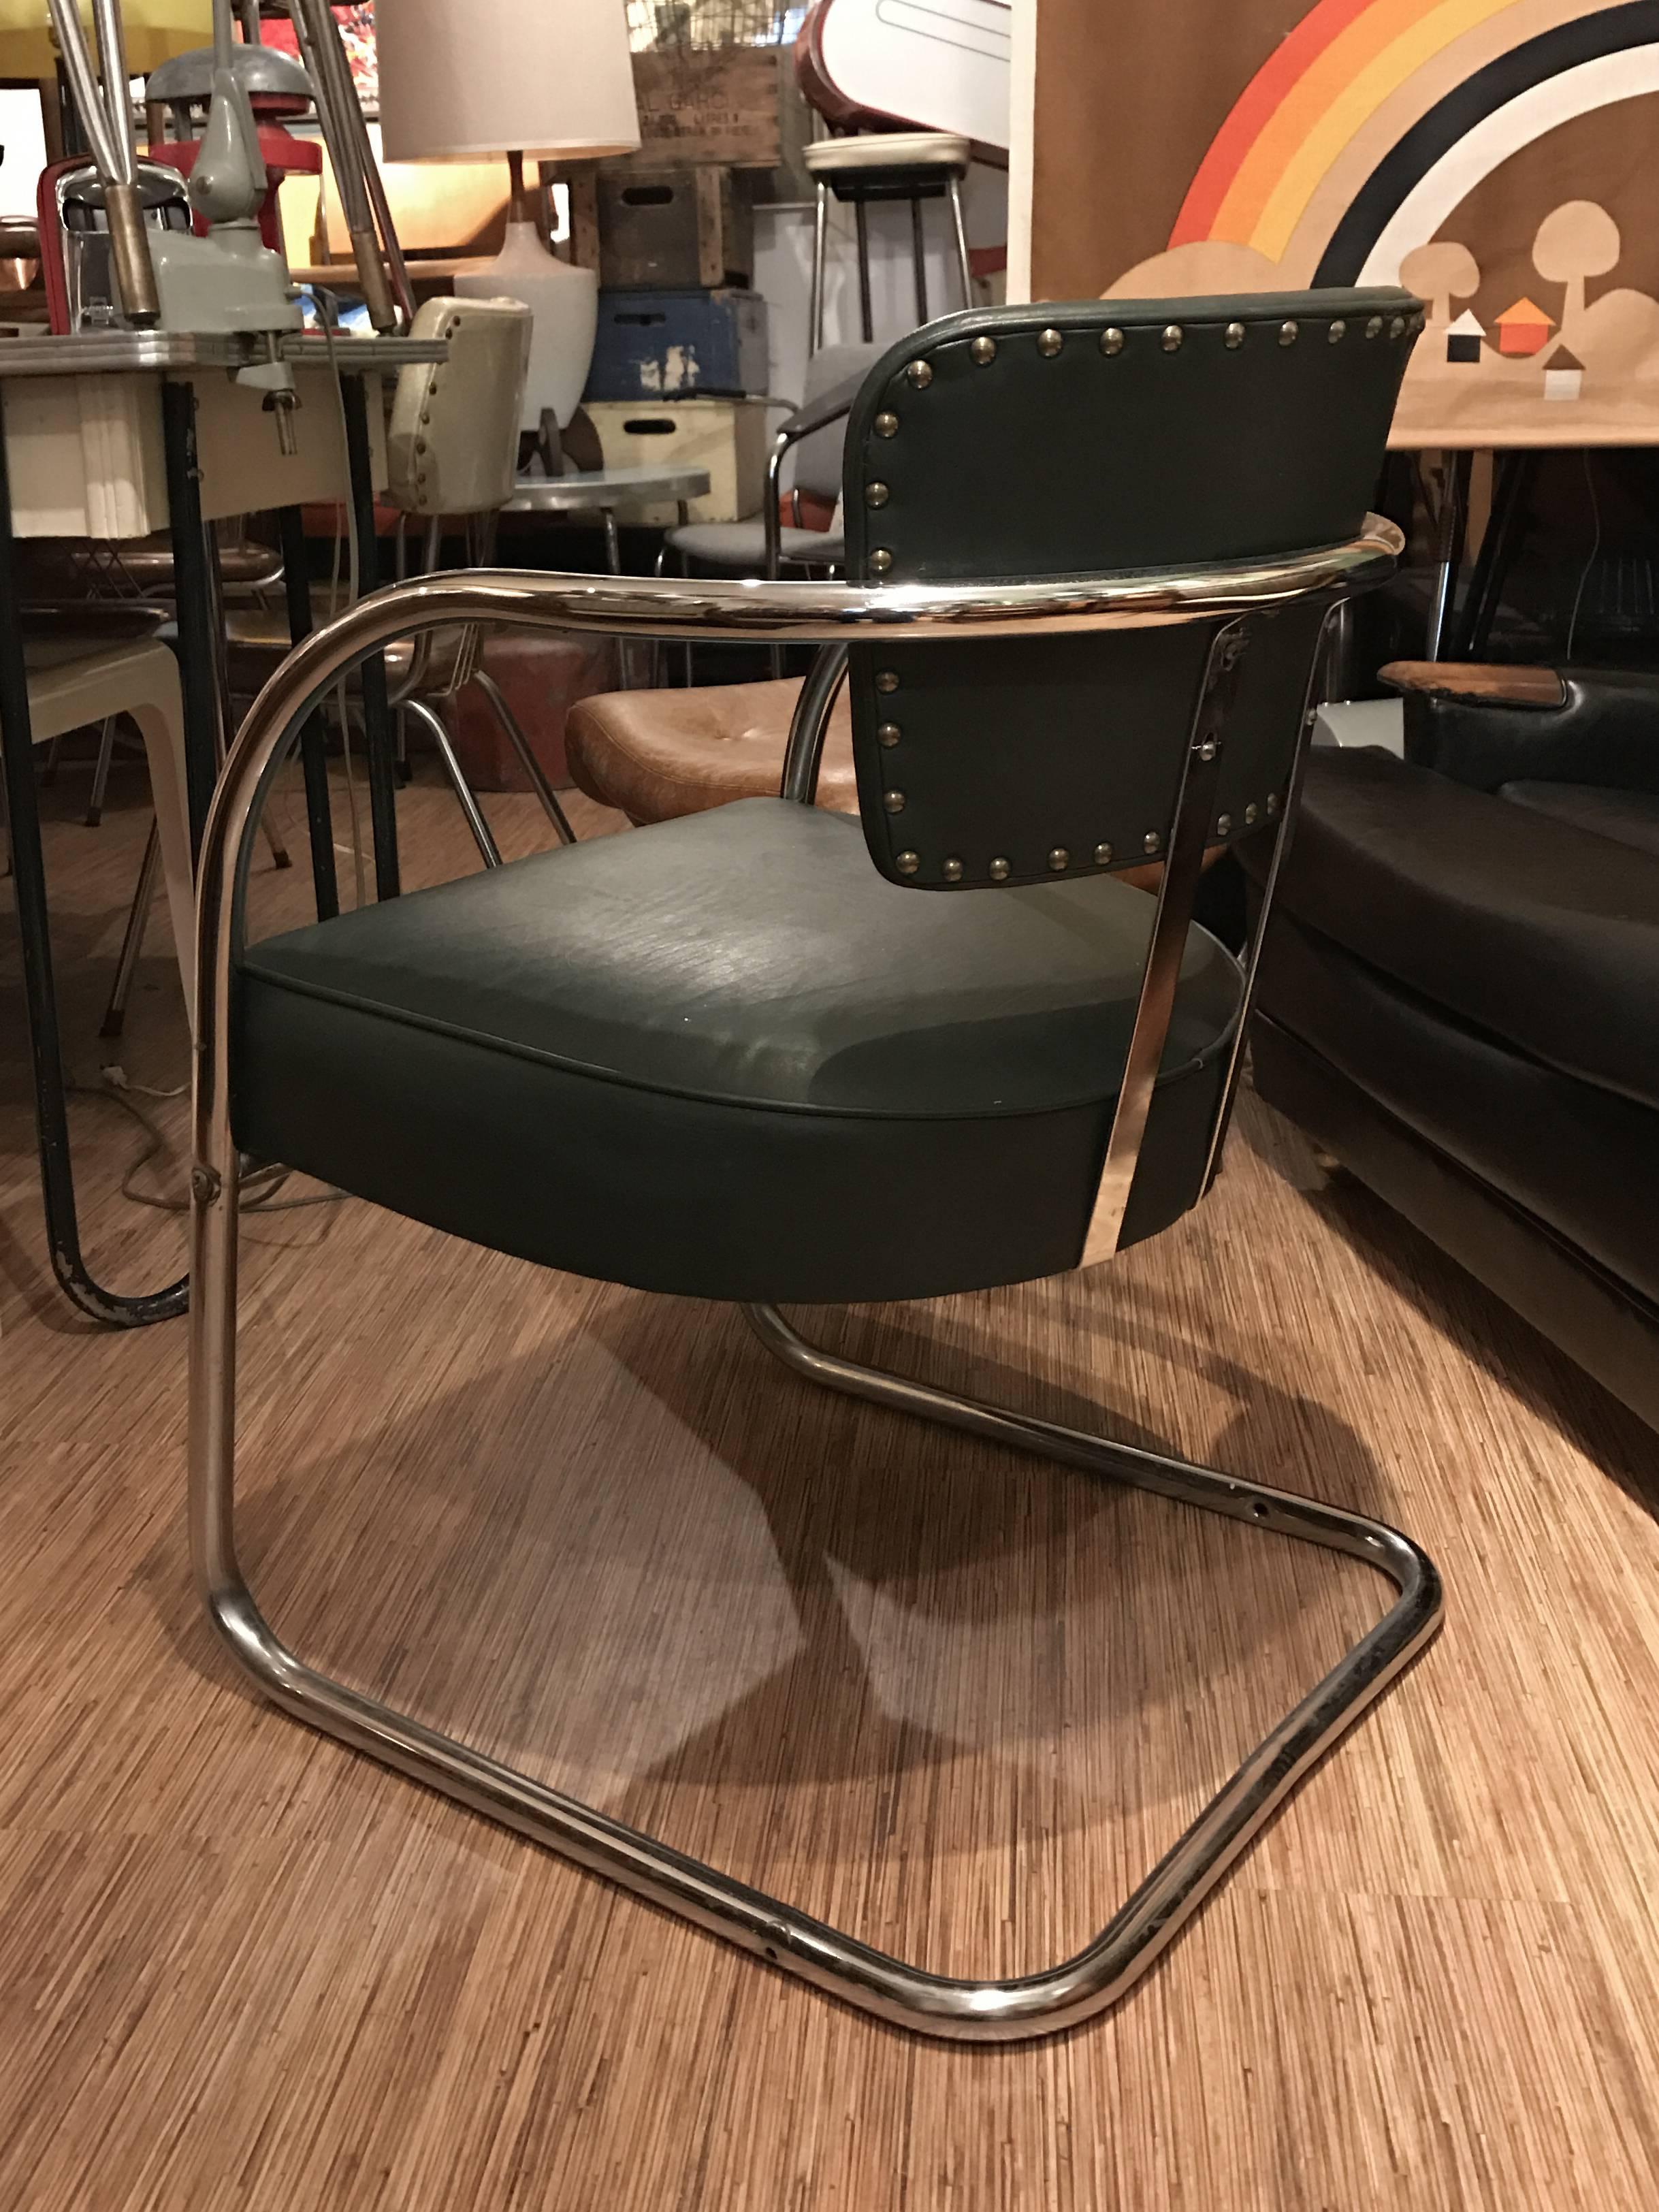 Art Deco chromed chair by KEM Weber. Chrome in very good condition with minor wear near screws (see photos). Stunning piece, very comfortable.